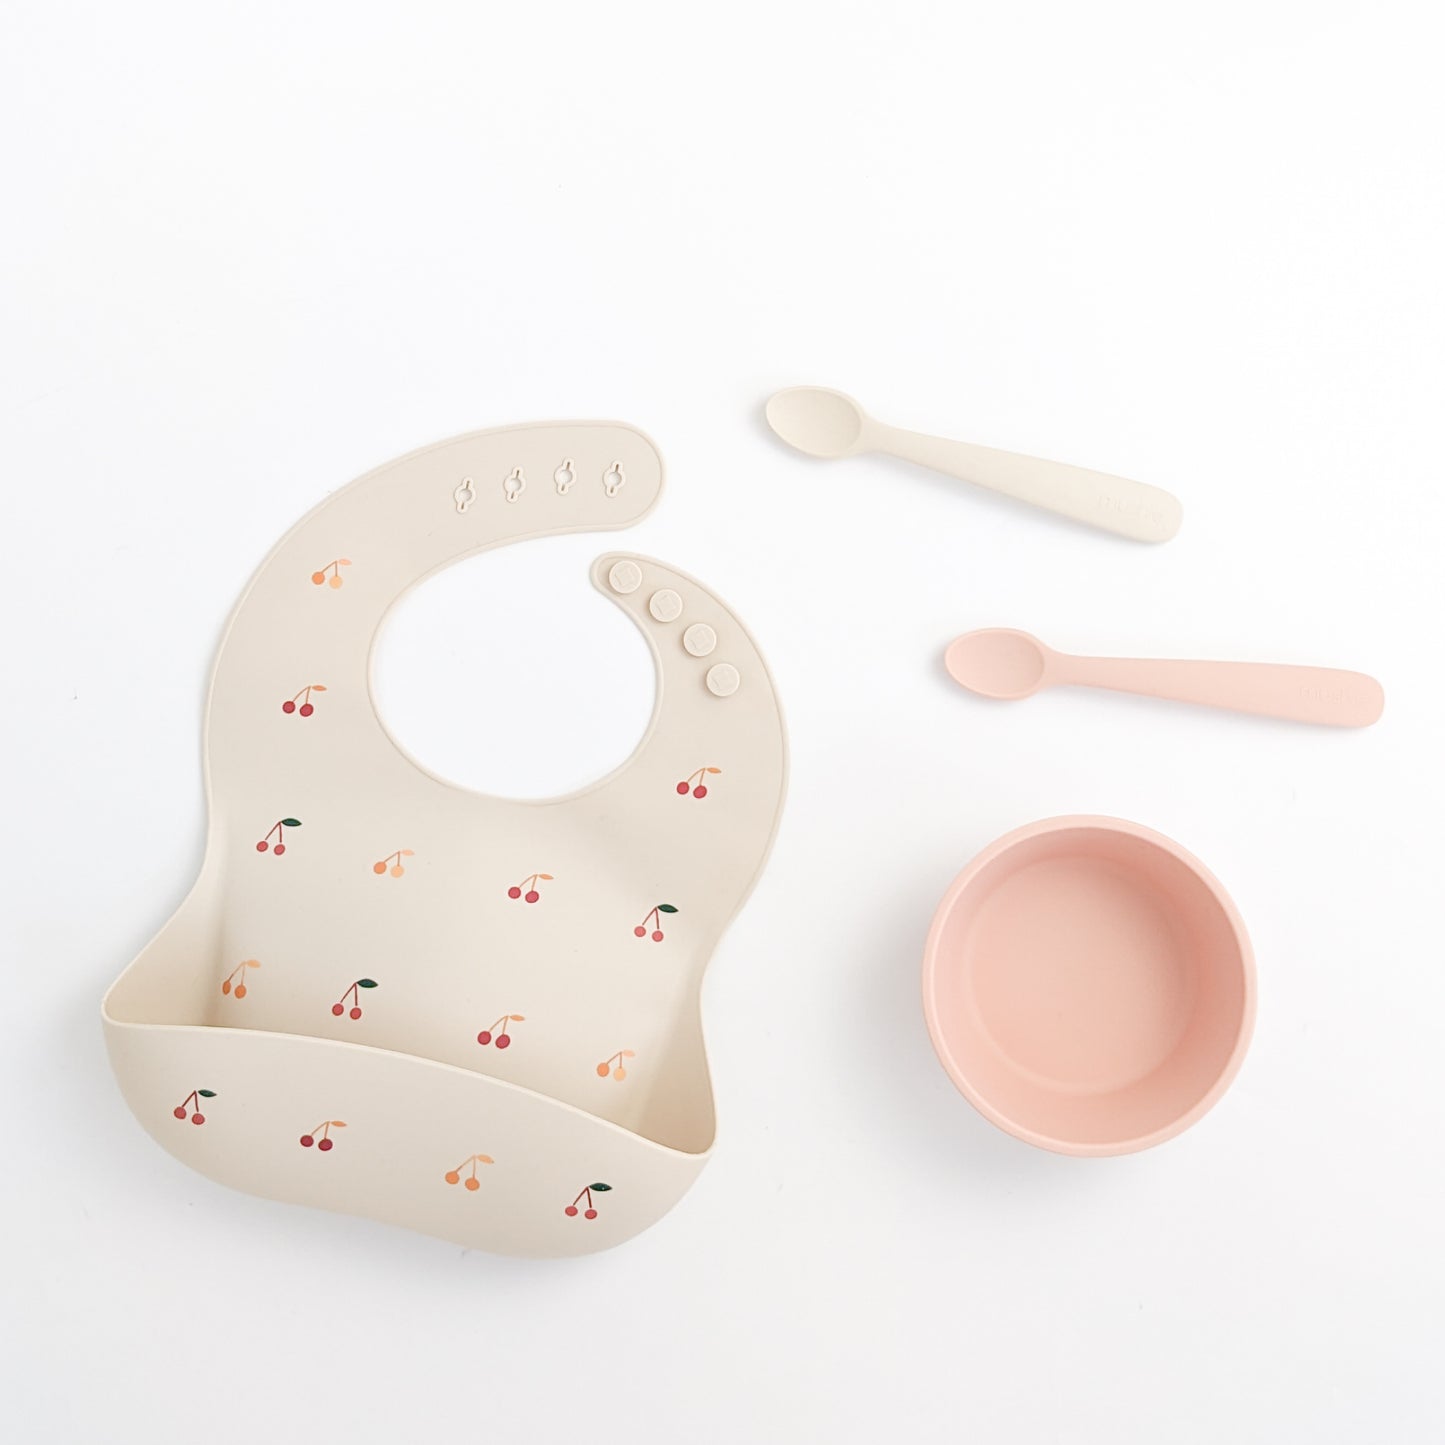 Table ware set / チェリーセット